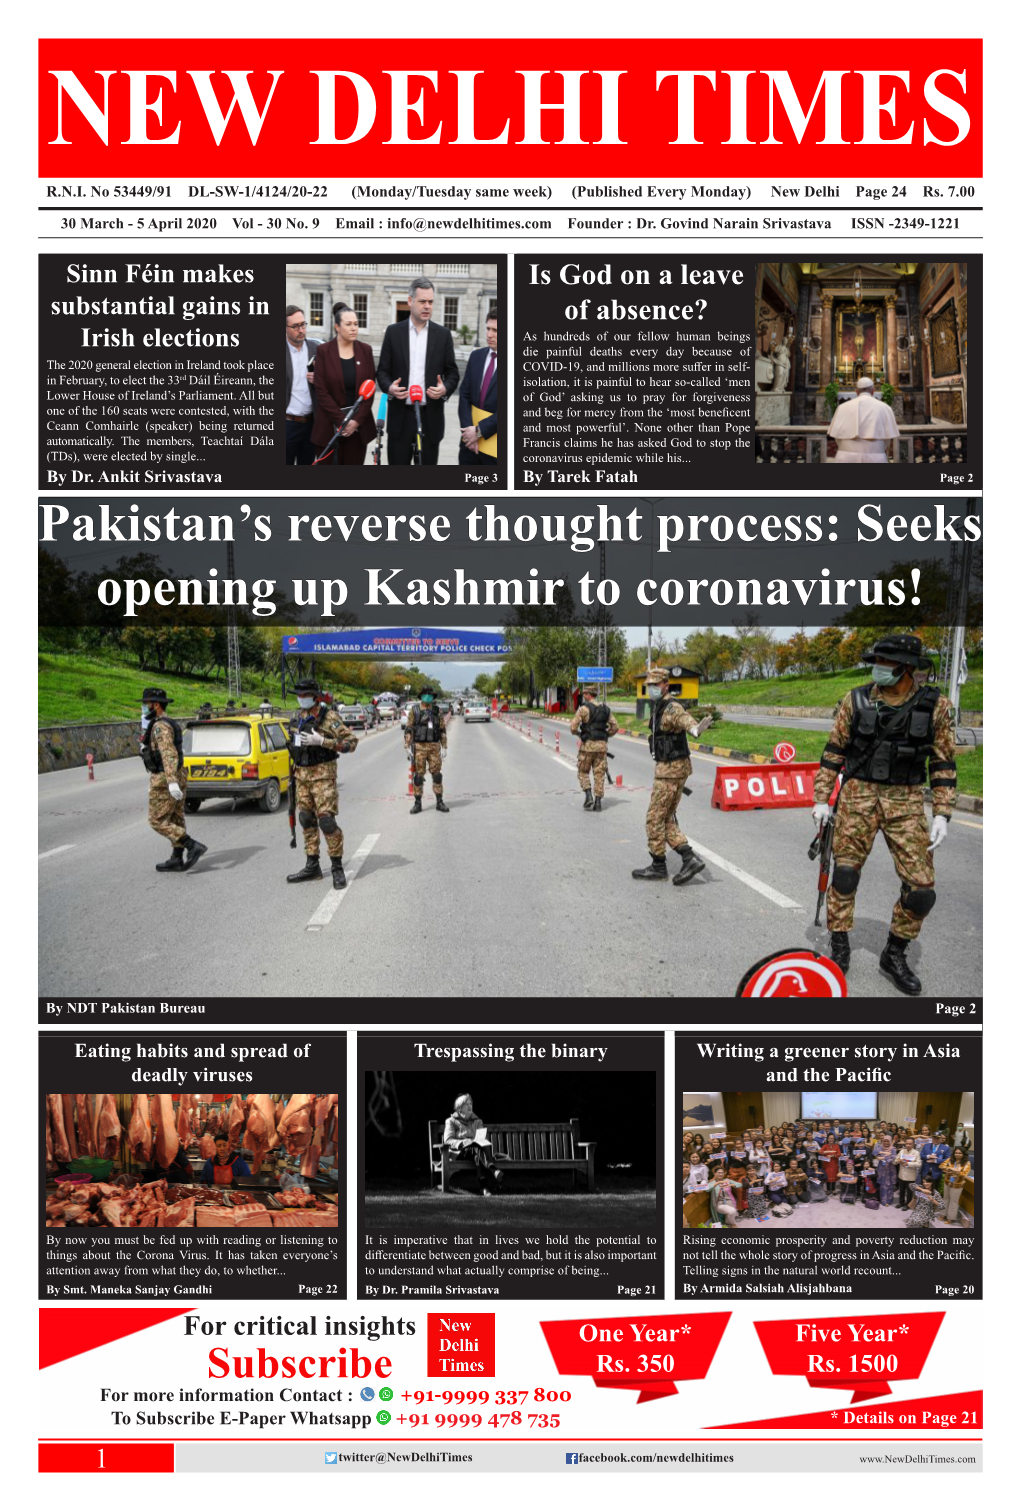 Pakistan's Reverse Thought Process: Seeks Opening up Kashmir To